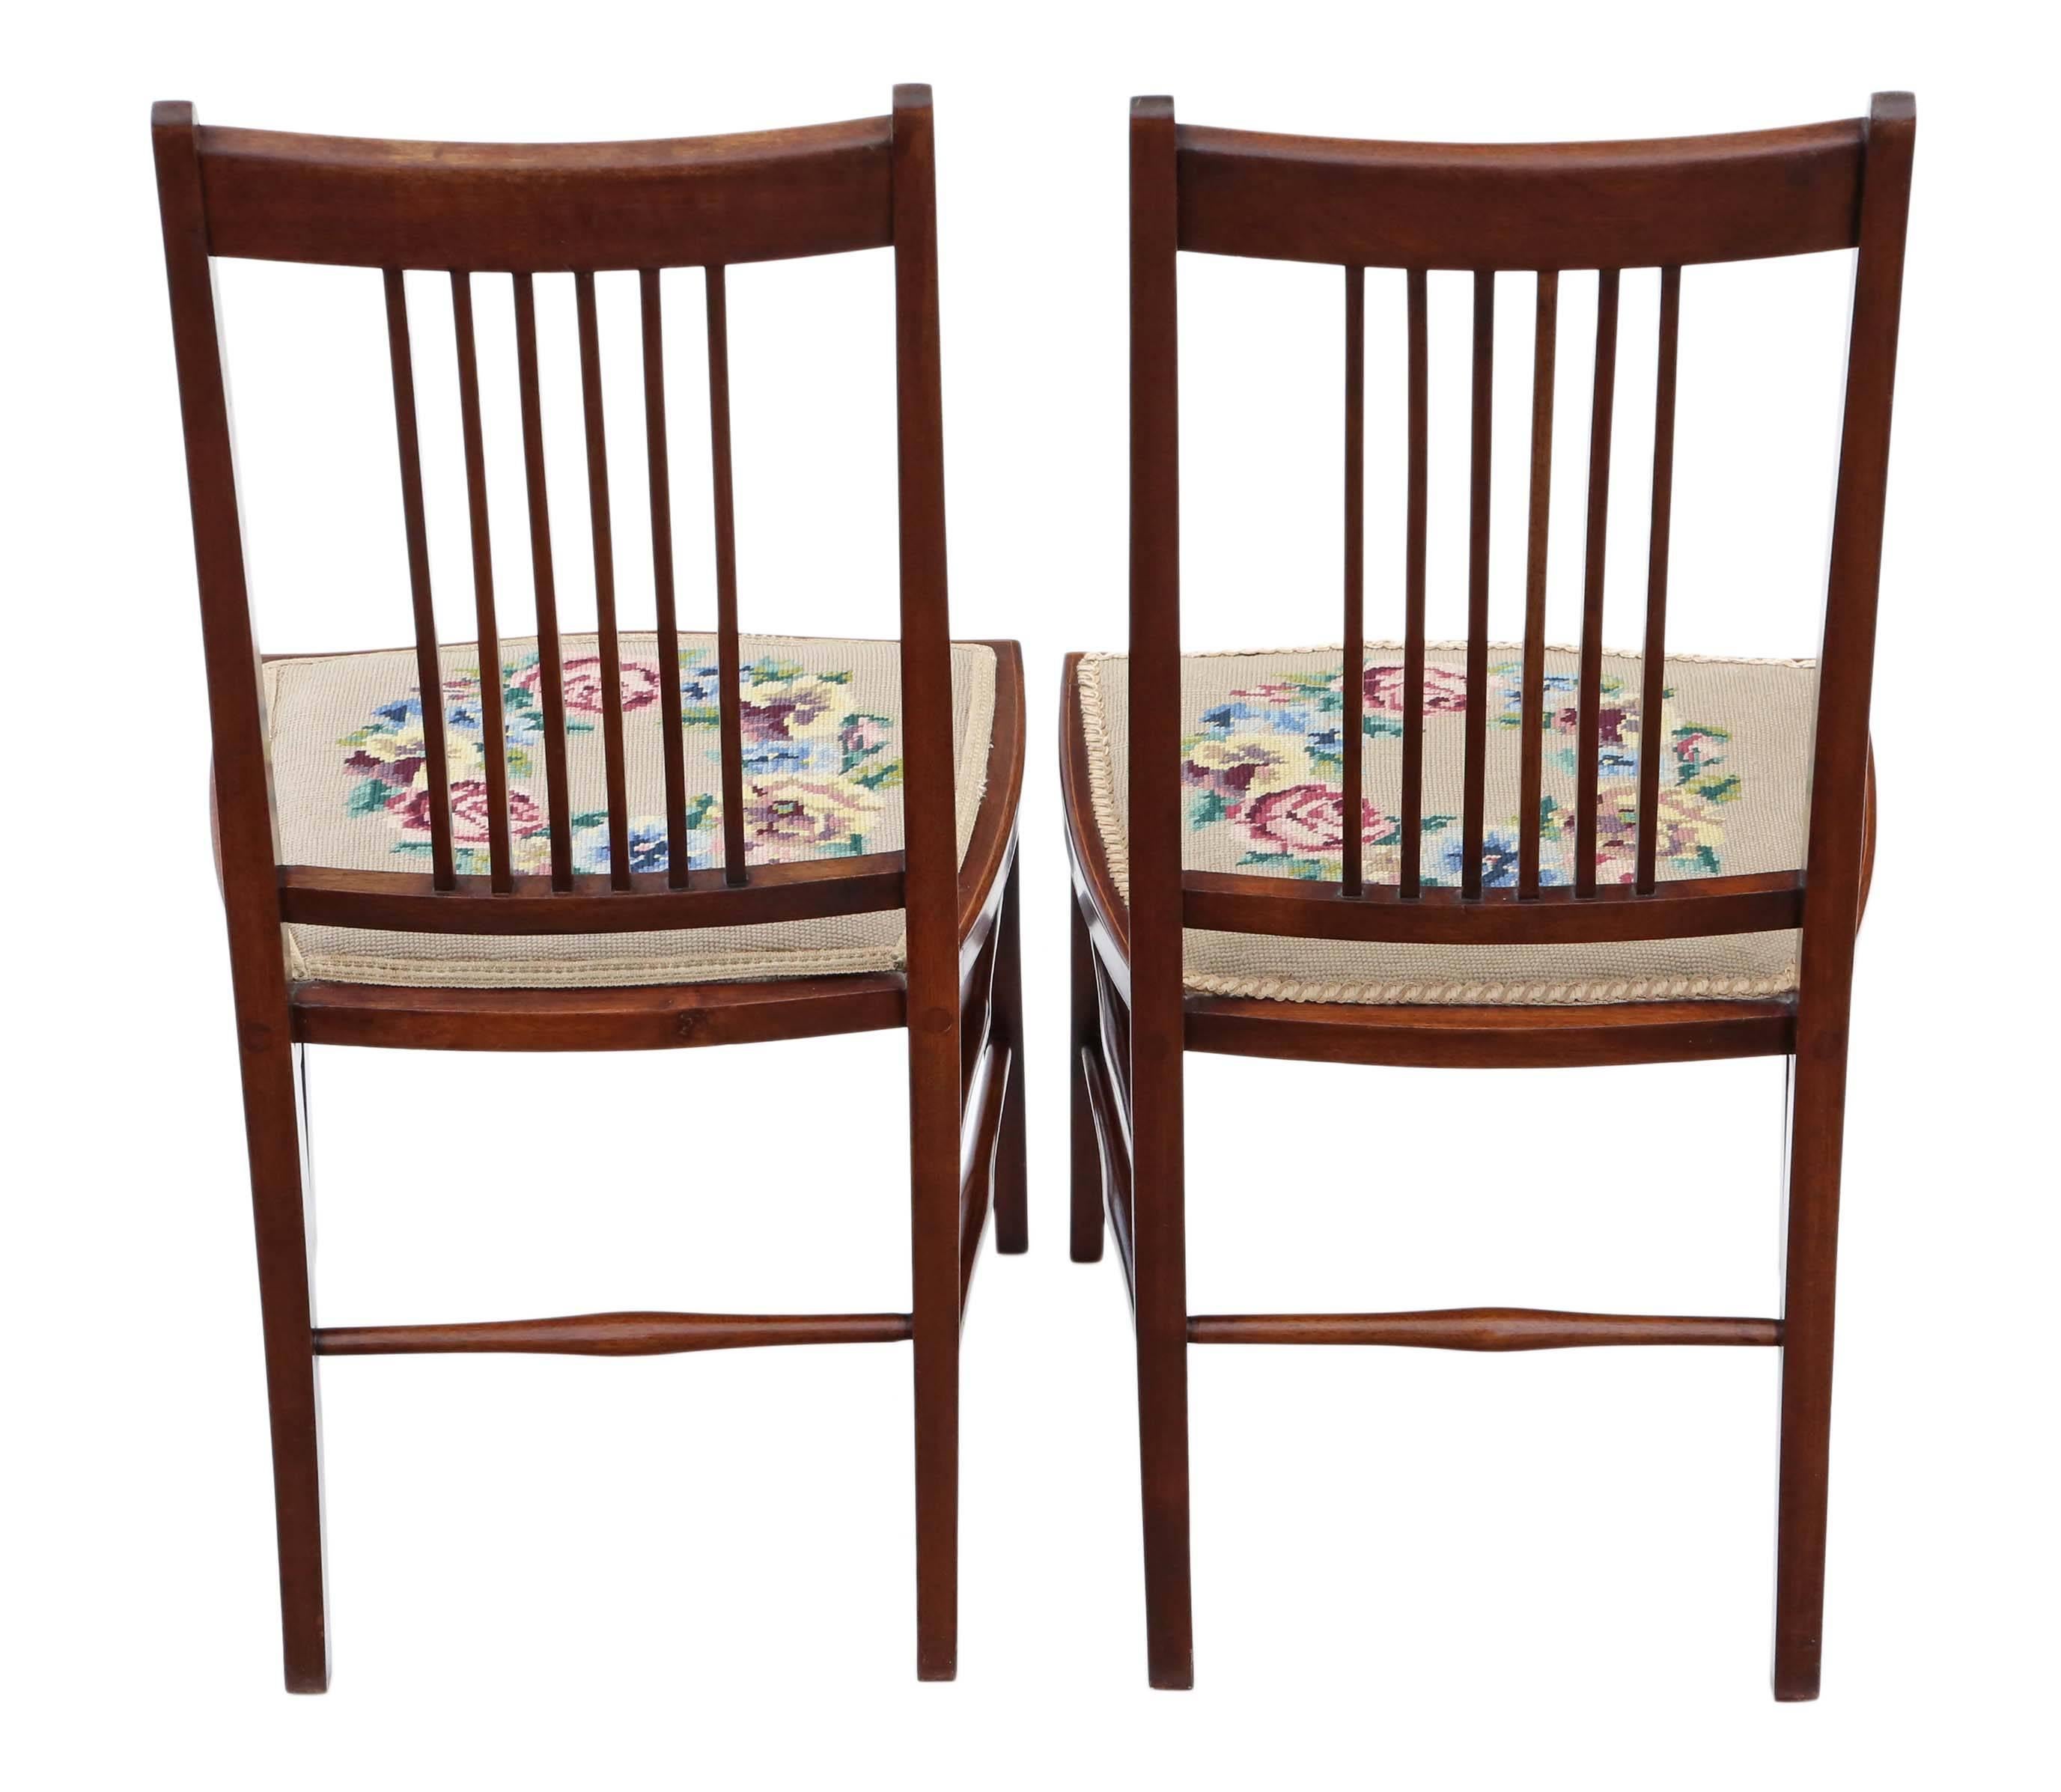 Antique quality pair of Edwardian needlepoint inlaid mahogany bedroom chairs.

A great rare find, with lovely proportions and styling.

Lovely color, age, patina and charm.

The needlepoint seat upholstery is old, but only has light wear and